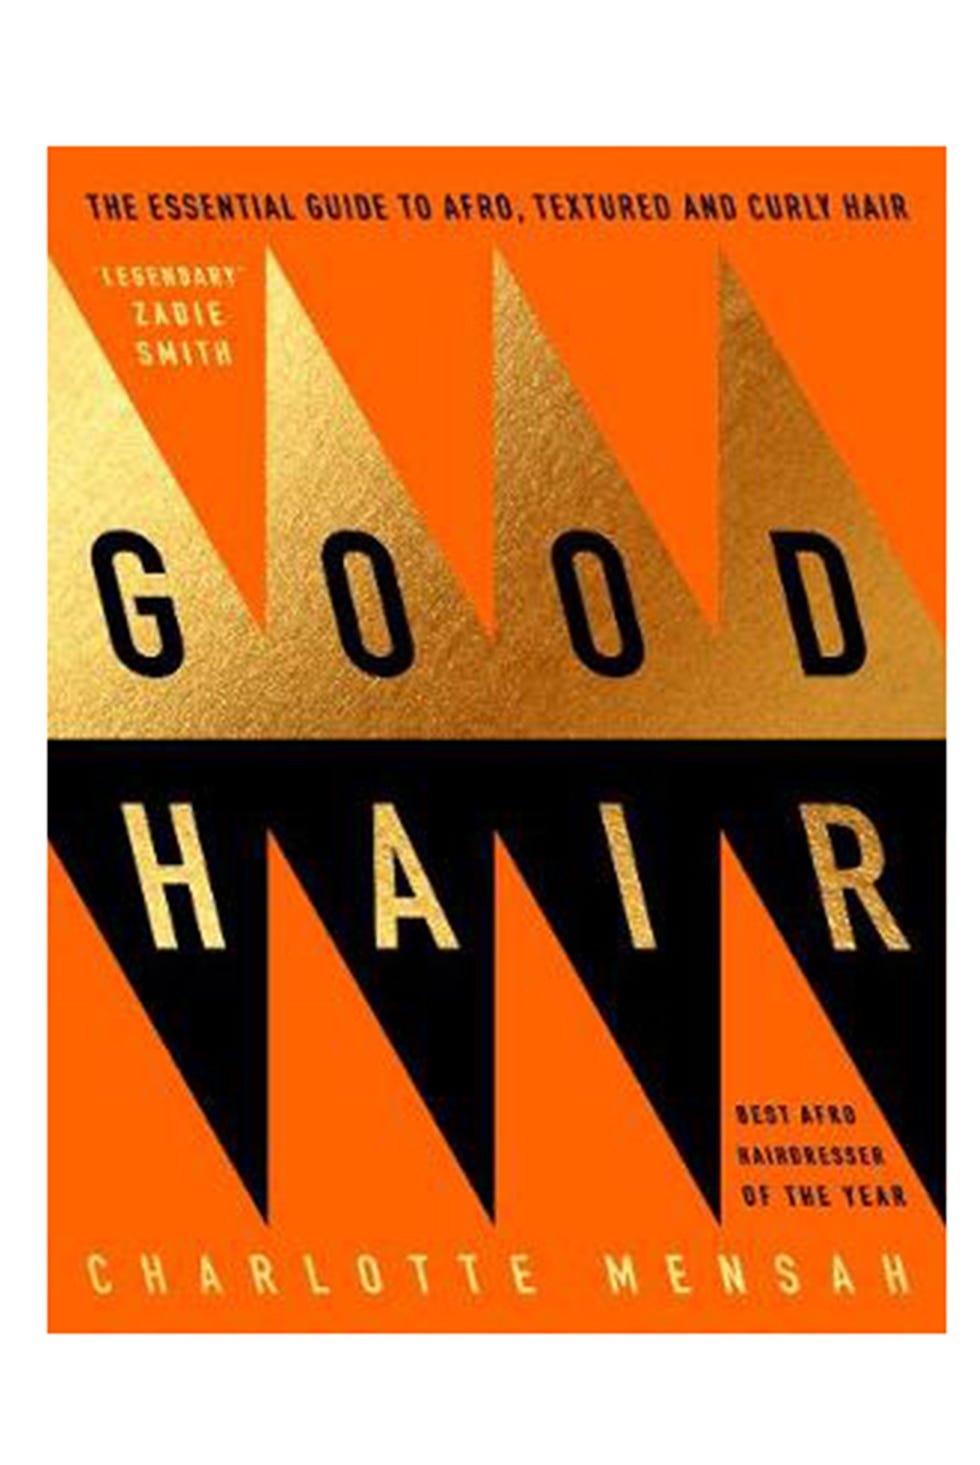 Good Hair: The Essential Guide to Afro, Textured and Curly Hair by Charlotte Mensah